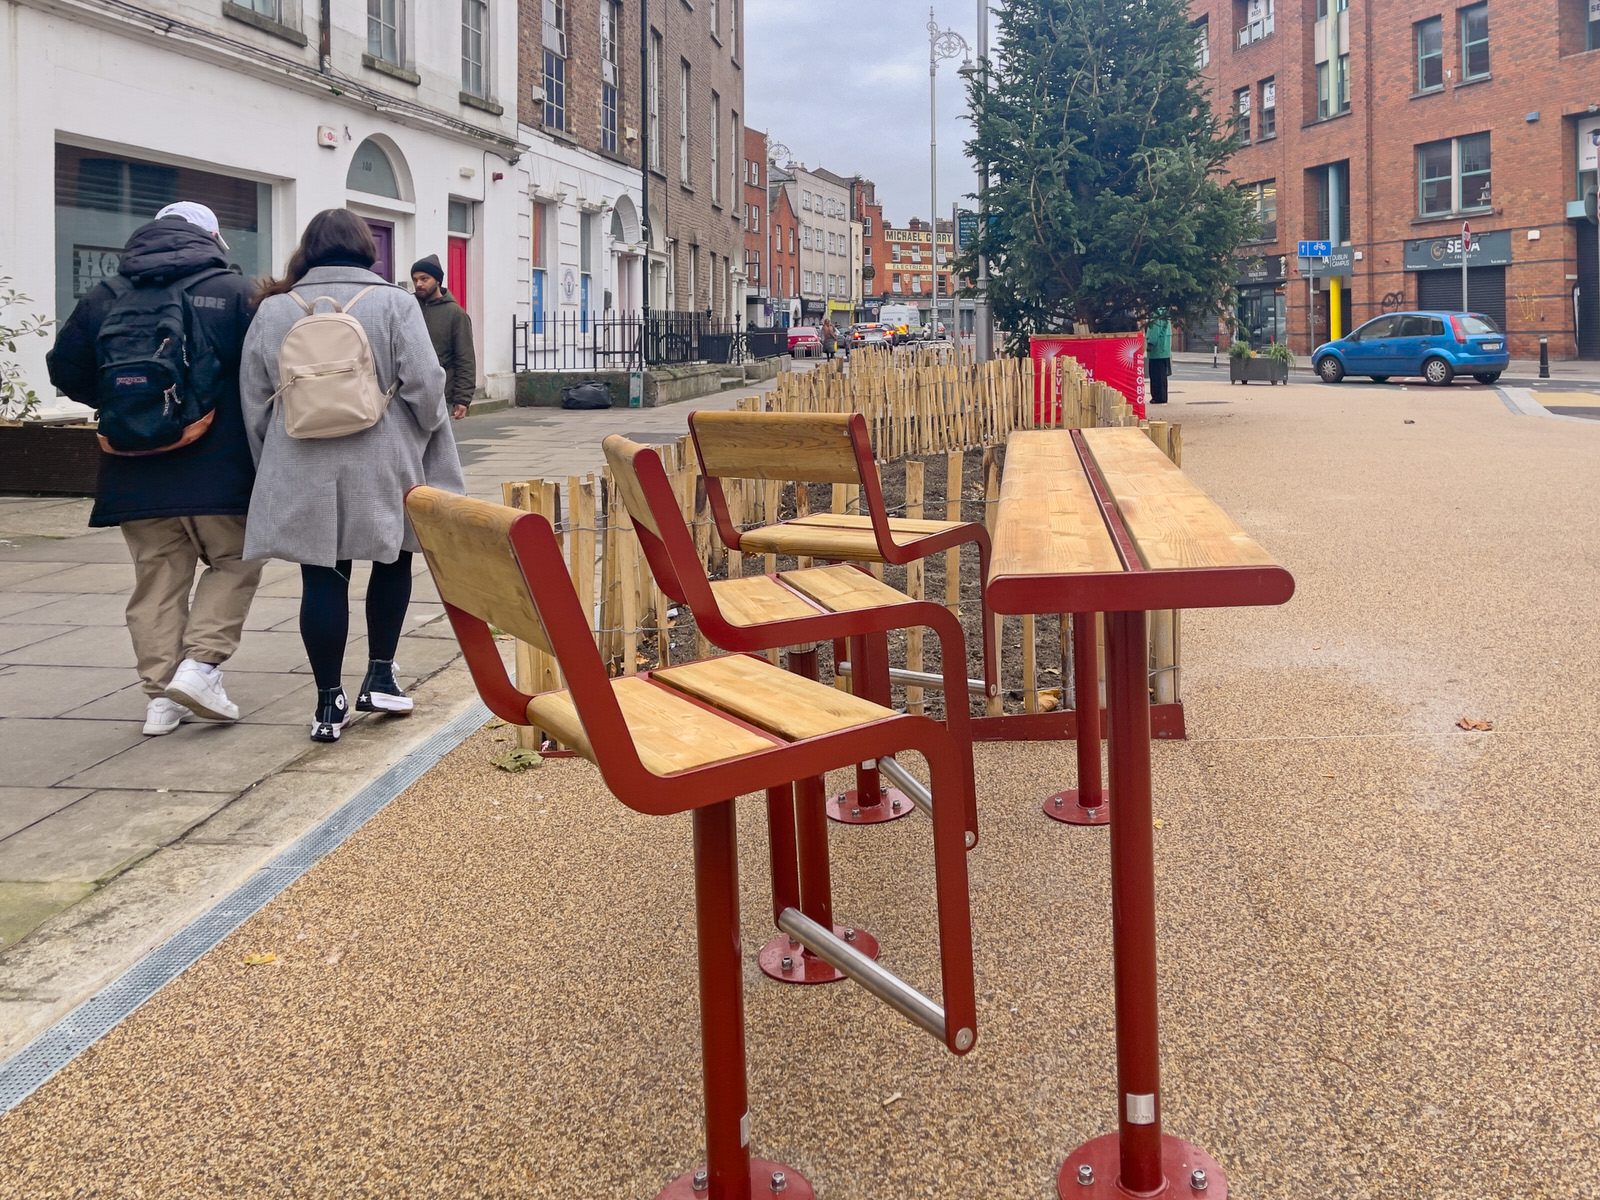 THE NEW STREET FURNITURE IS BEING INSTALLED ON CAPEL STREET [BUT THERE ARE FEW VISITORS TO BE SEEN TODAY]-225416-1